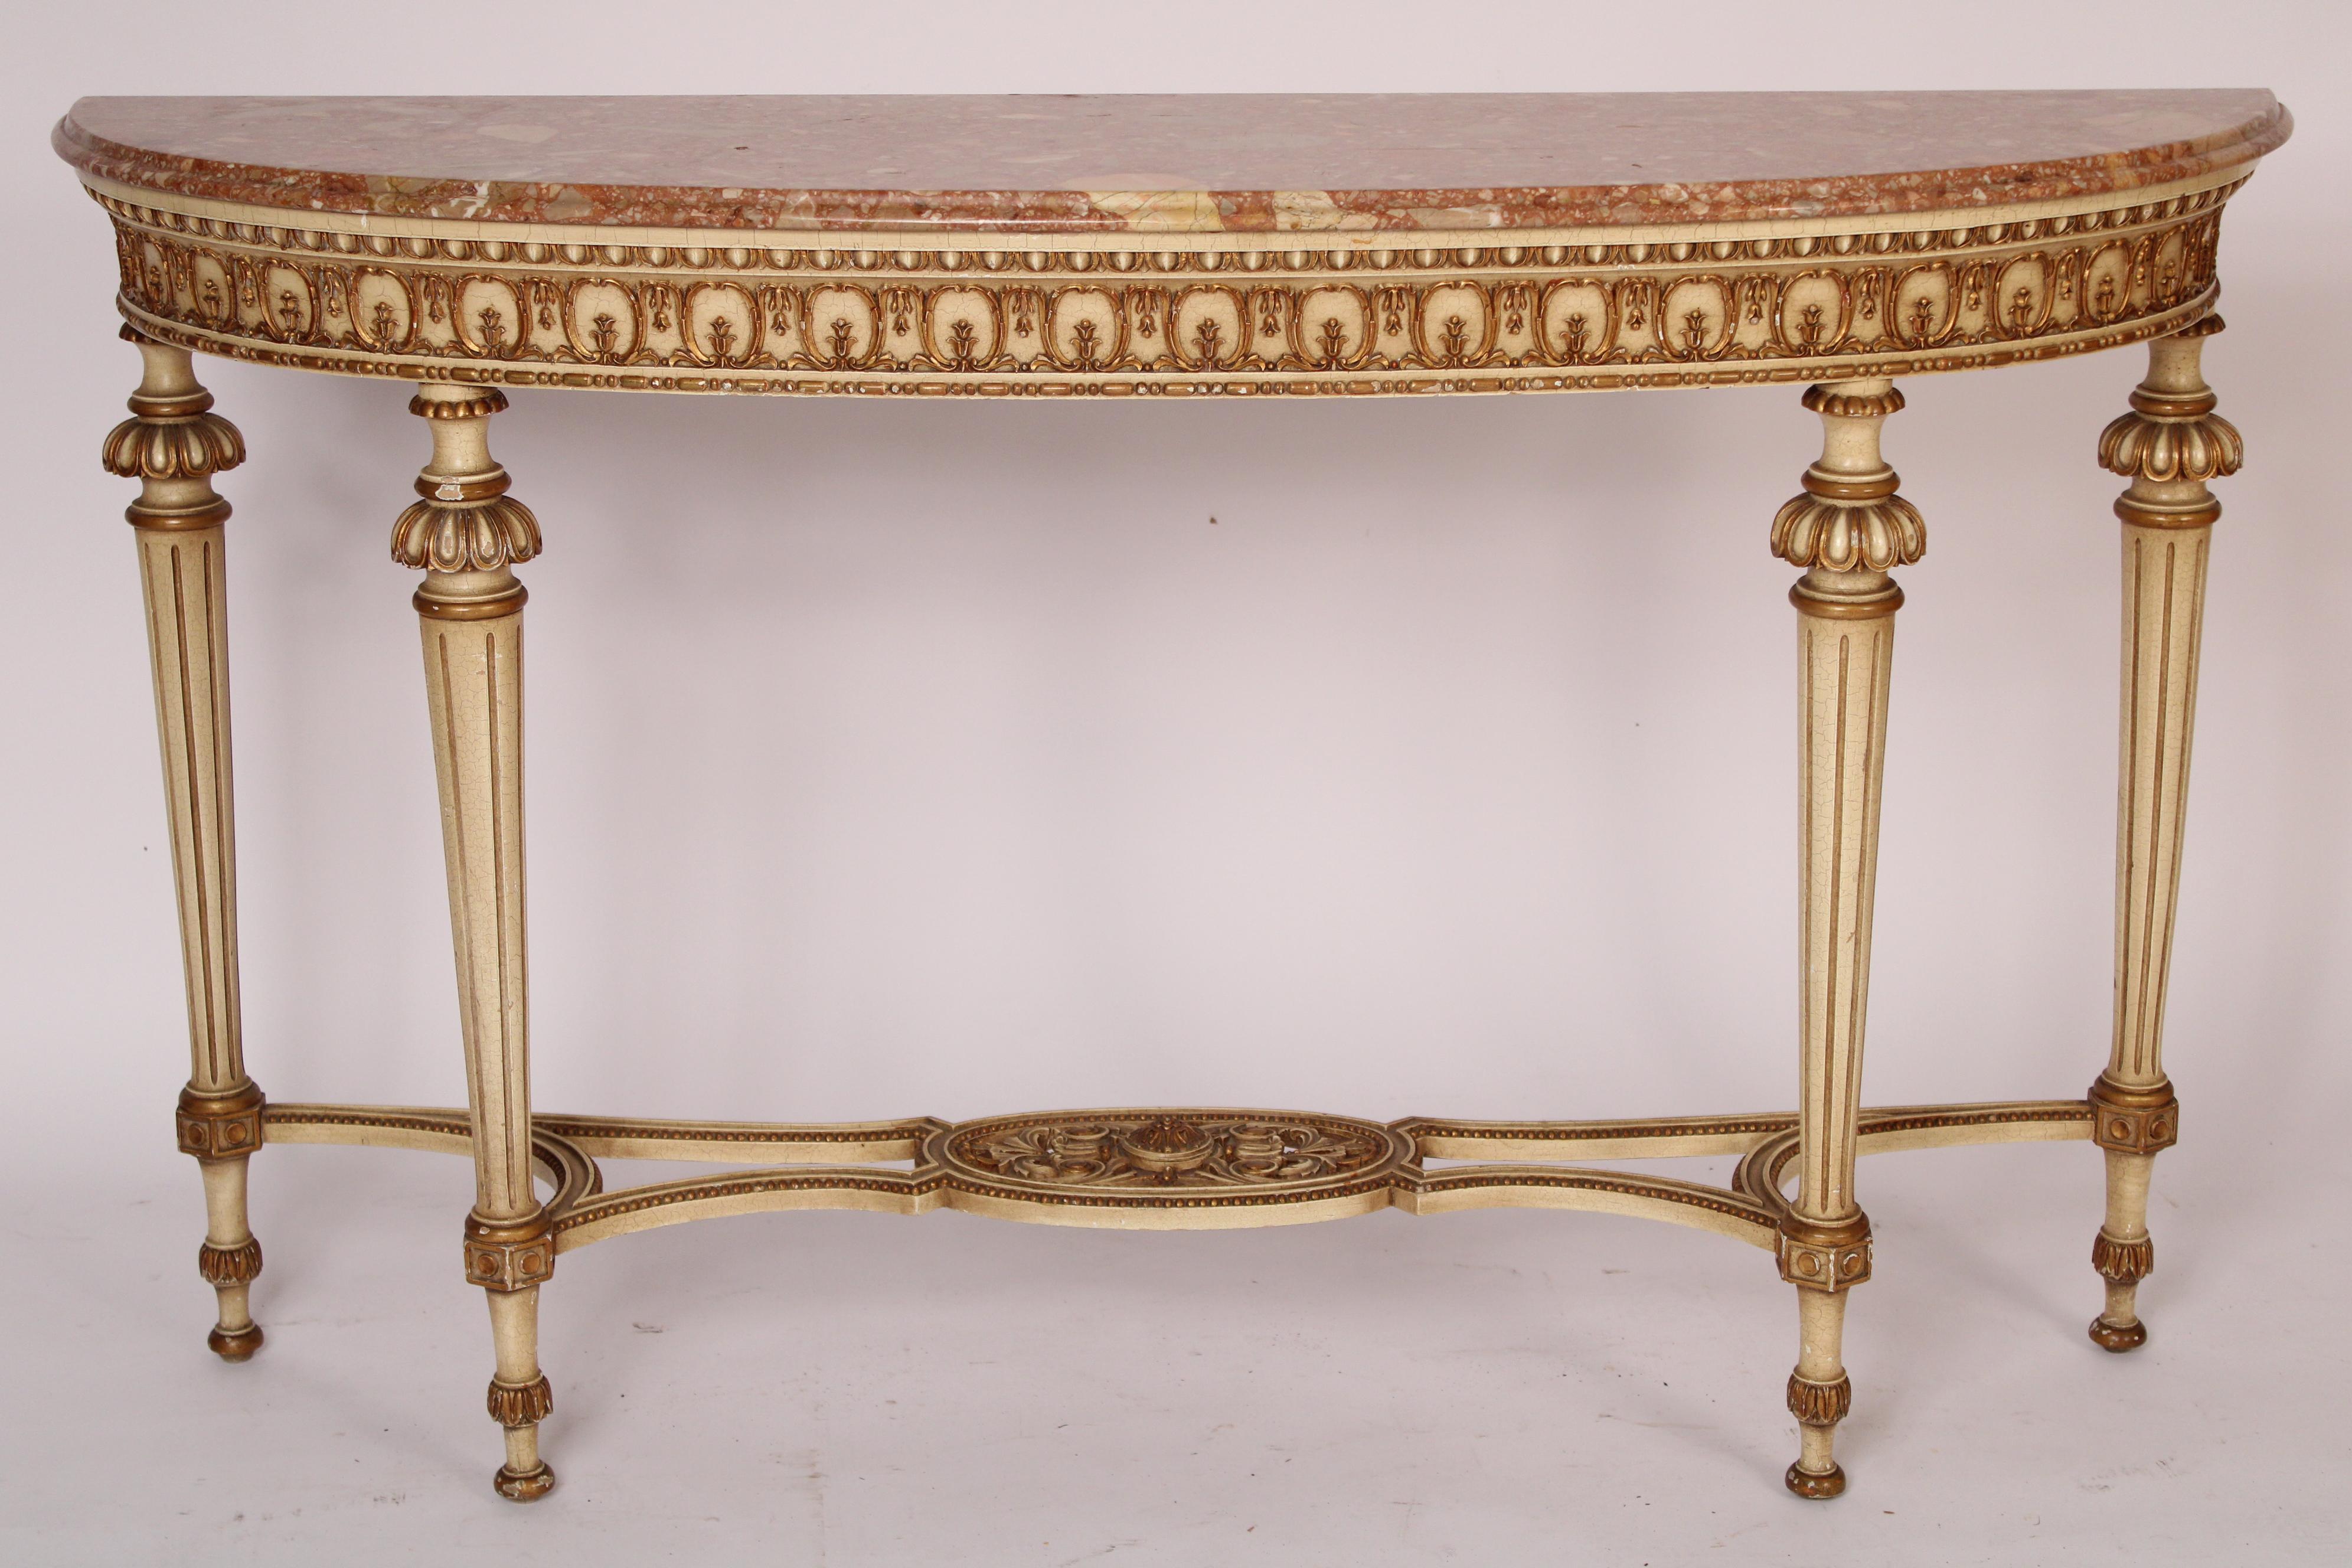 Louis XVI style painted and gilt decorated elongated demi lune marble top console table, circa 1960's. With an elongated demi lune marble top with ogee edge, a frieze with egg and dart motif and cartouche and bellflower design, resting on turned